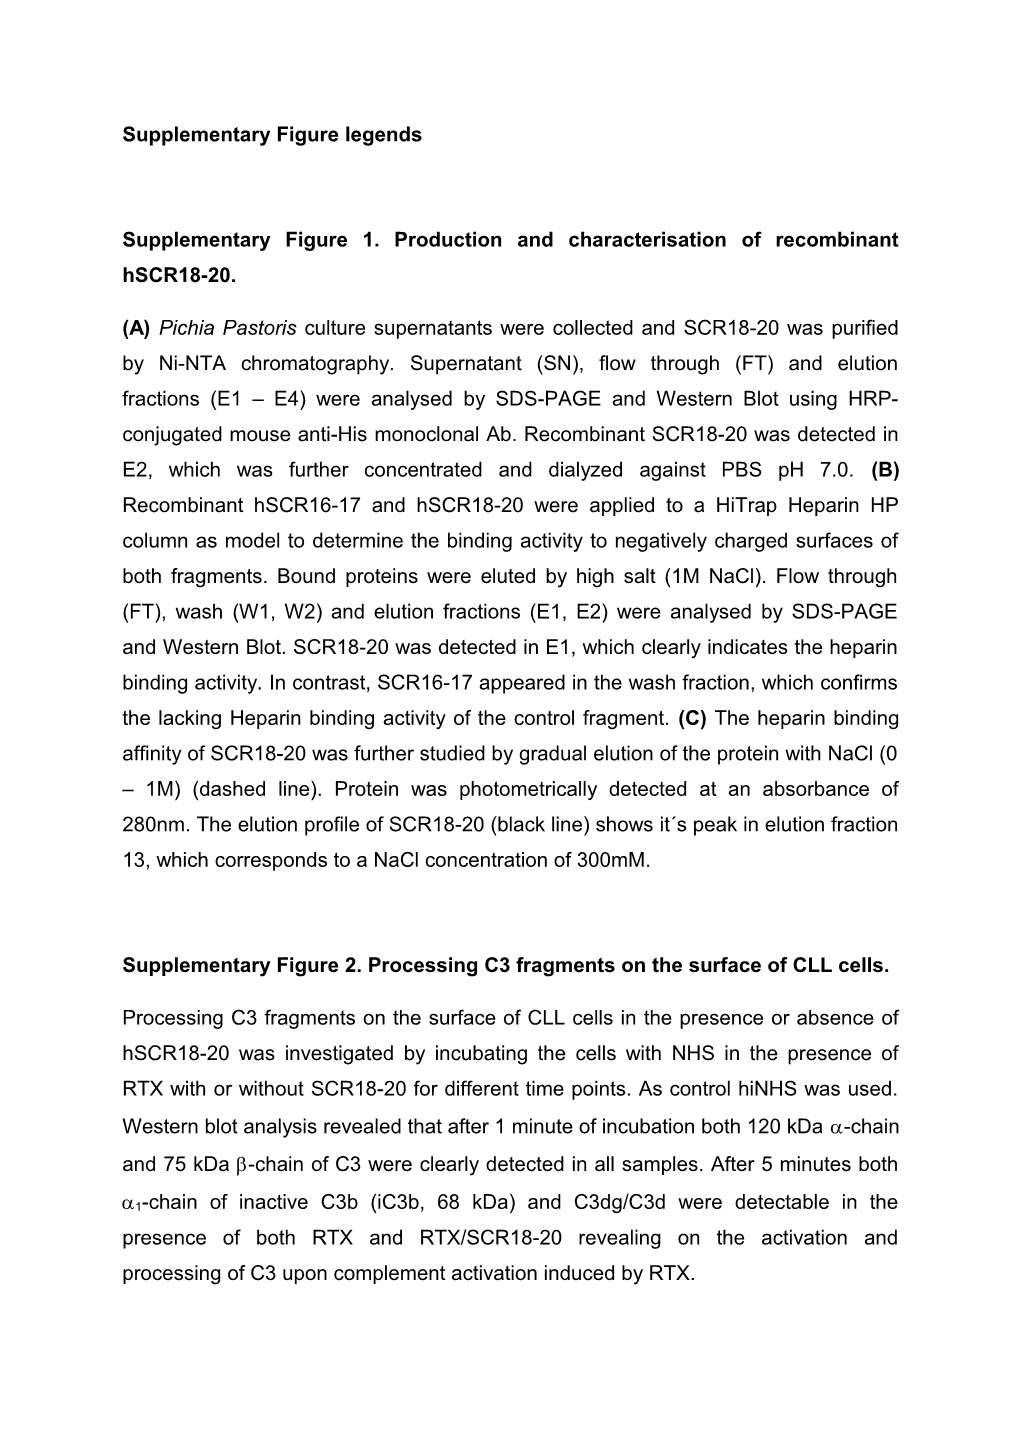 Supplementary Figure 1. Production and Characterisation of Recombinant Hscr18-20